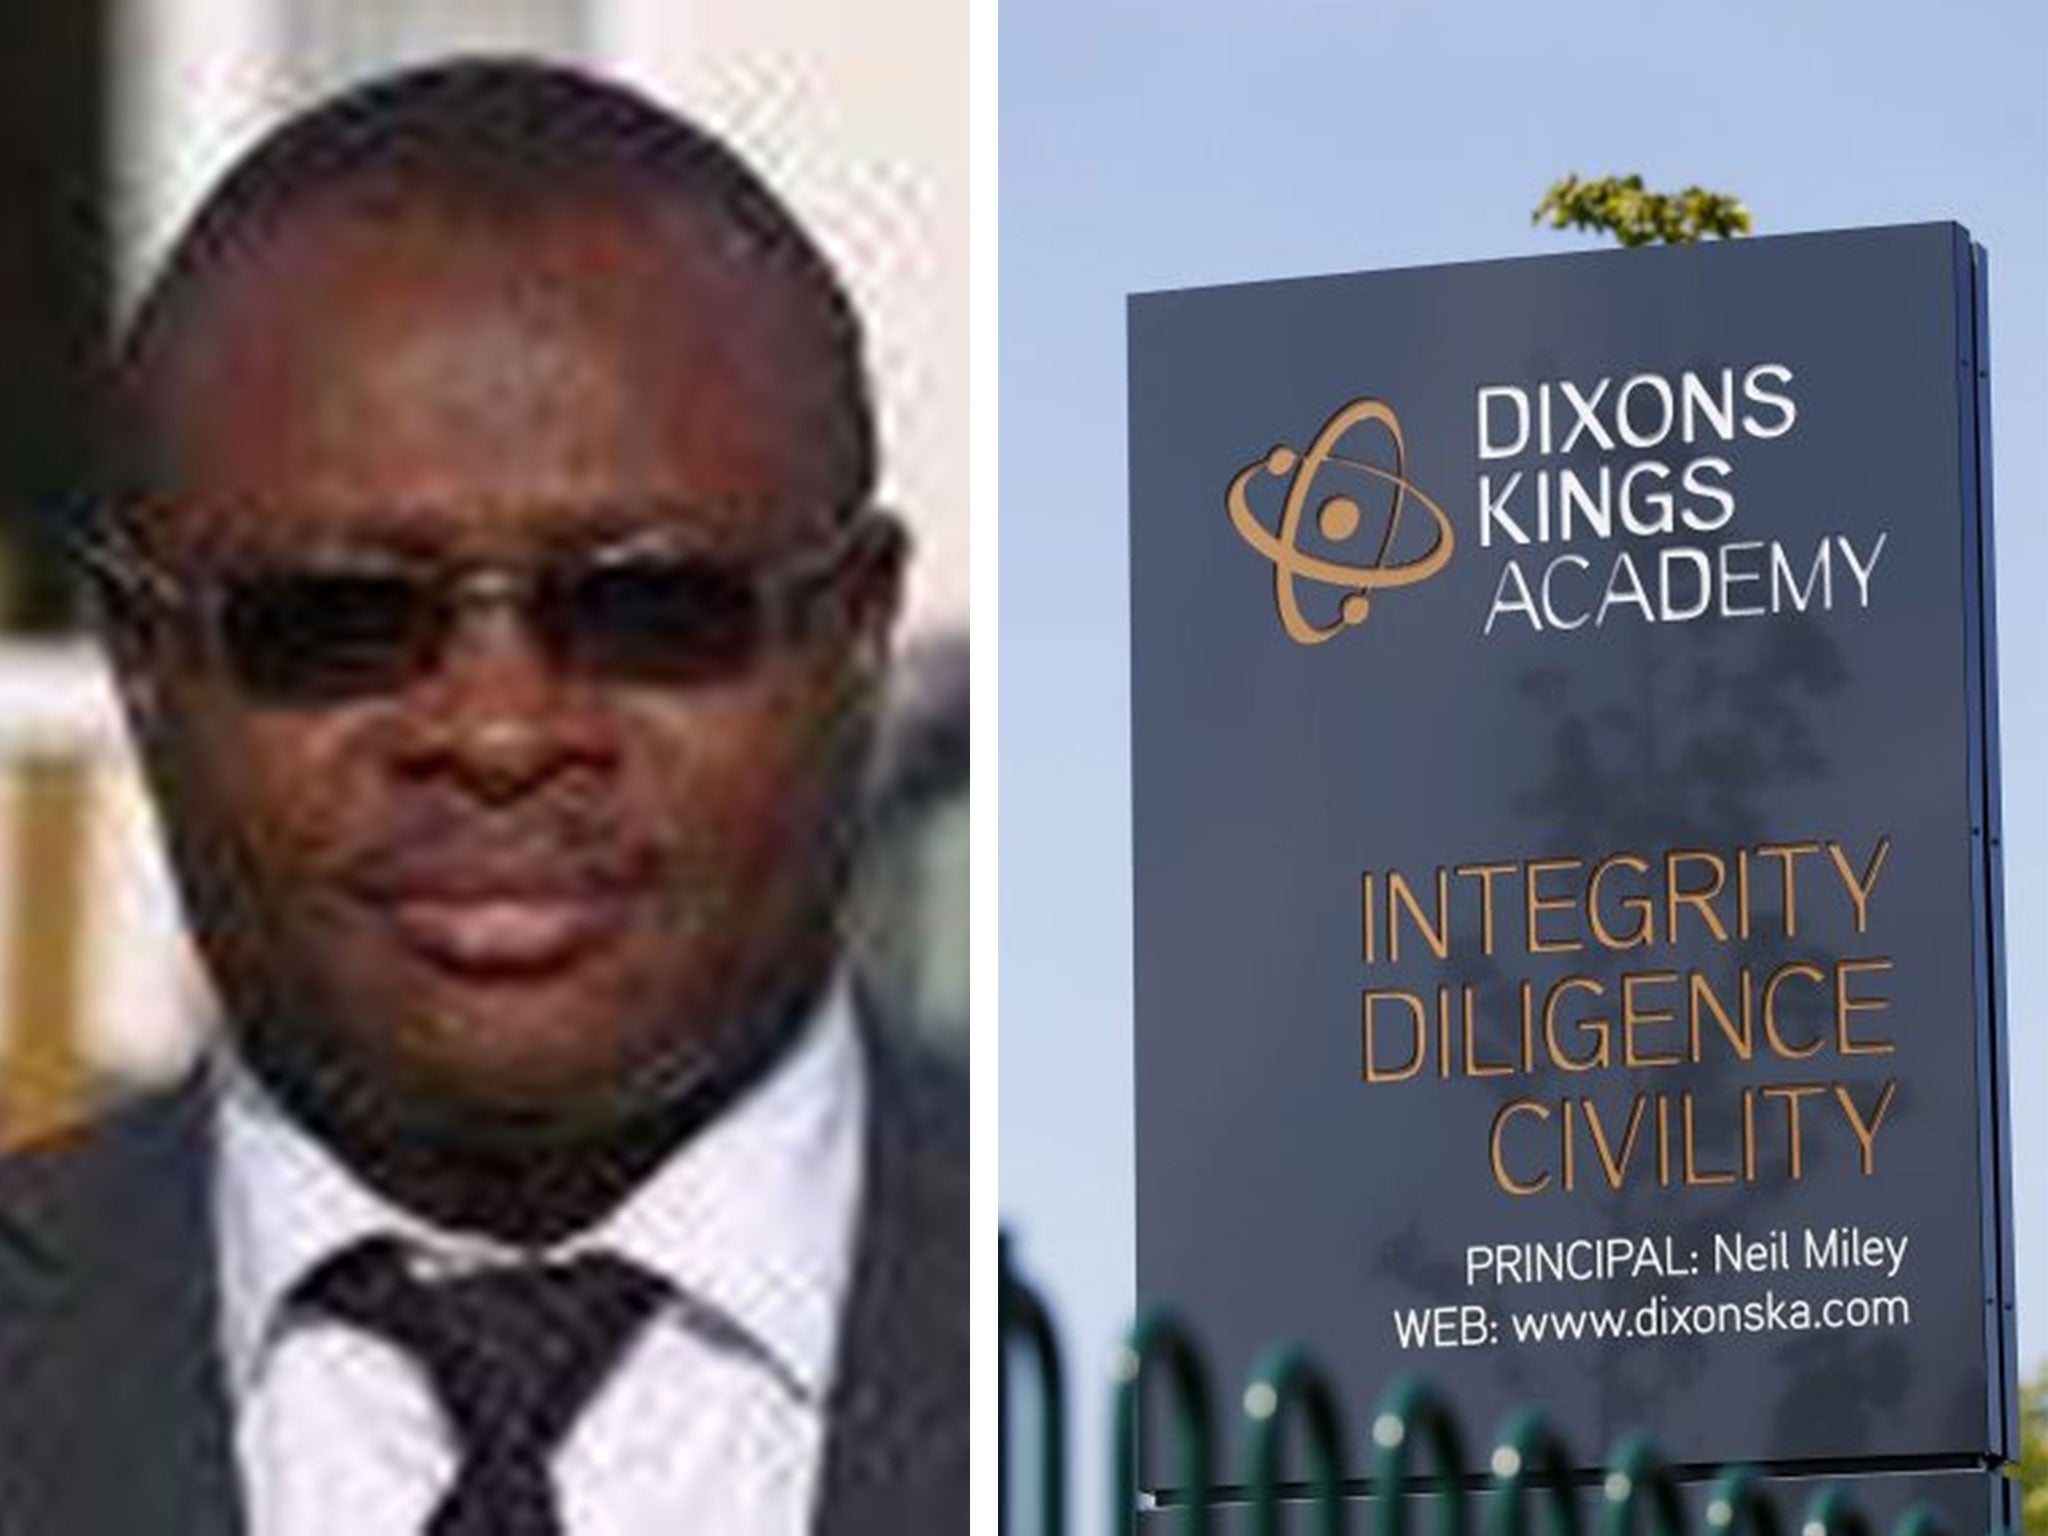 Vincent Uzomah, 50, who was stabbed at Dixons Kings Academy